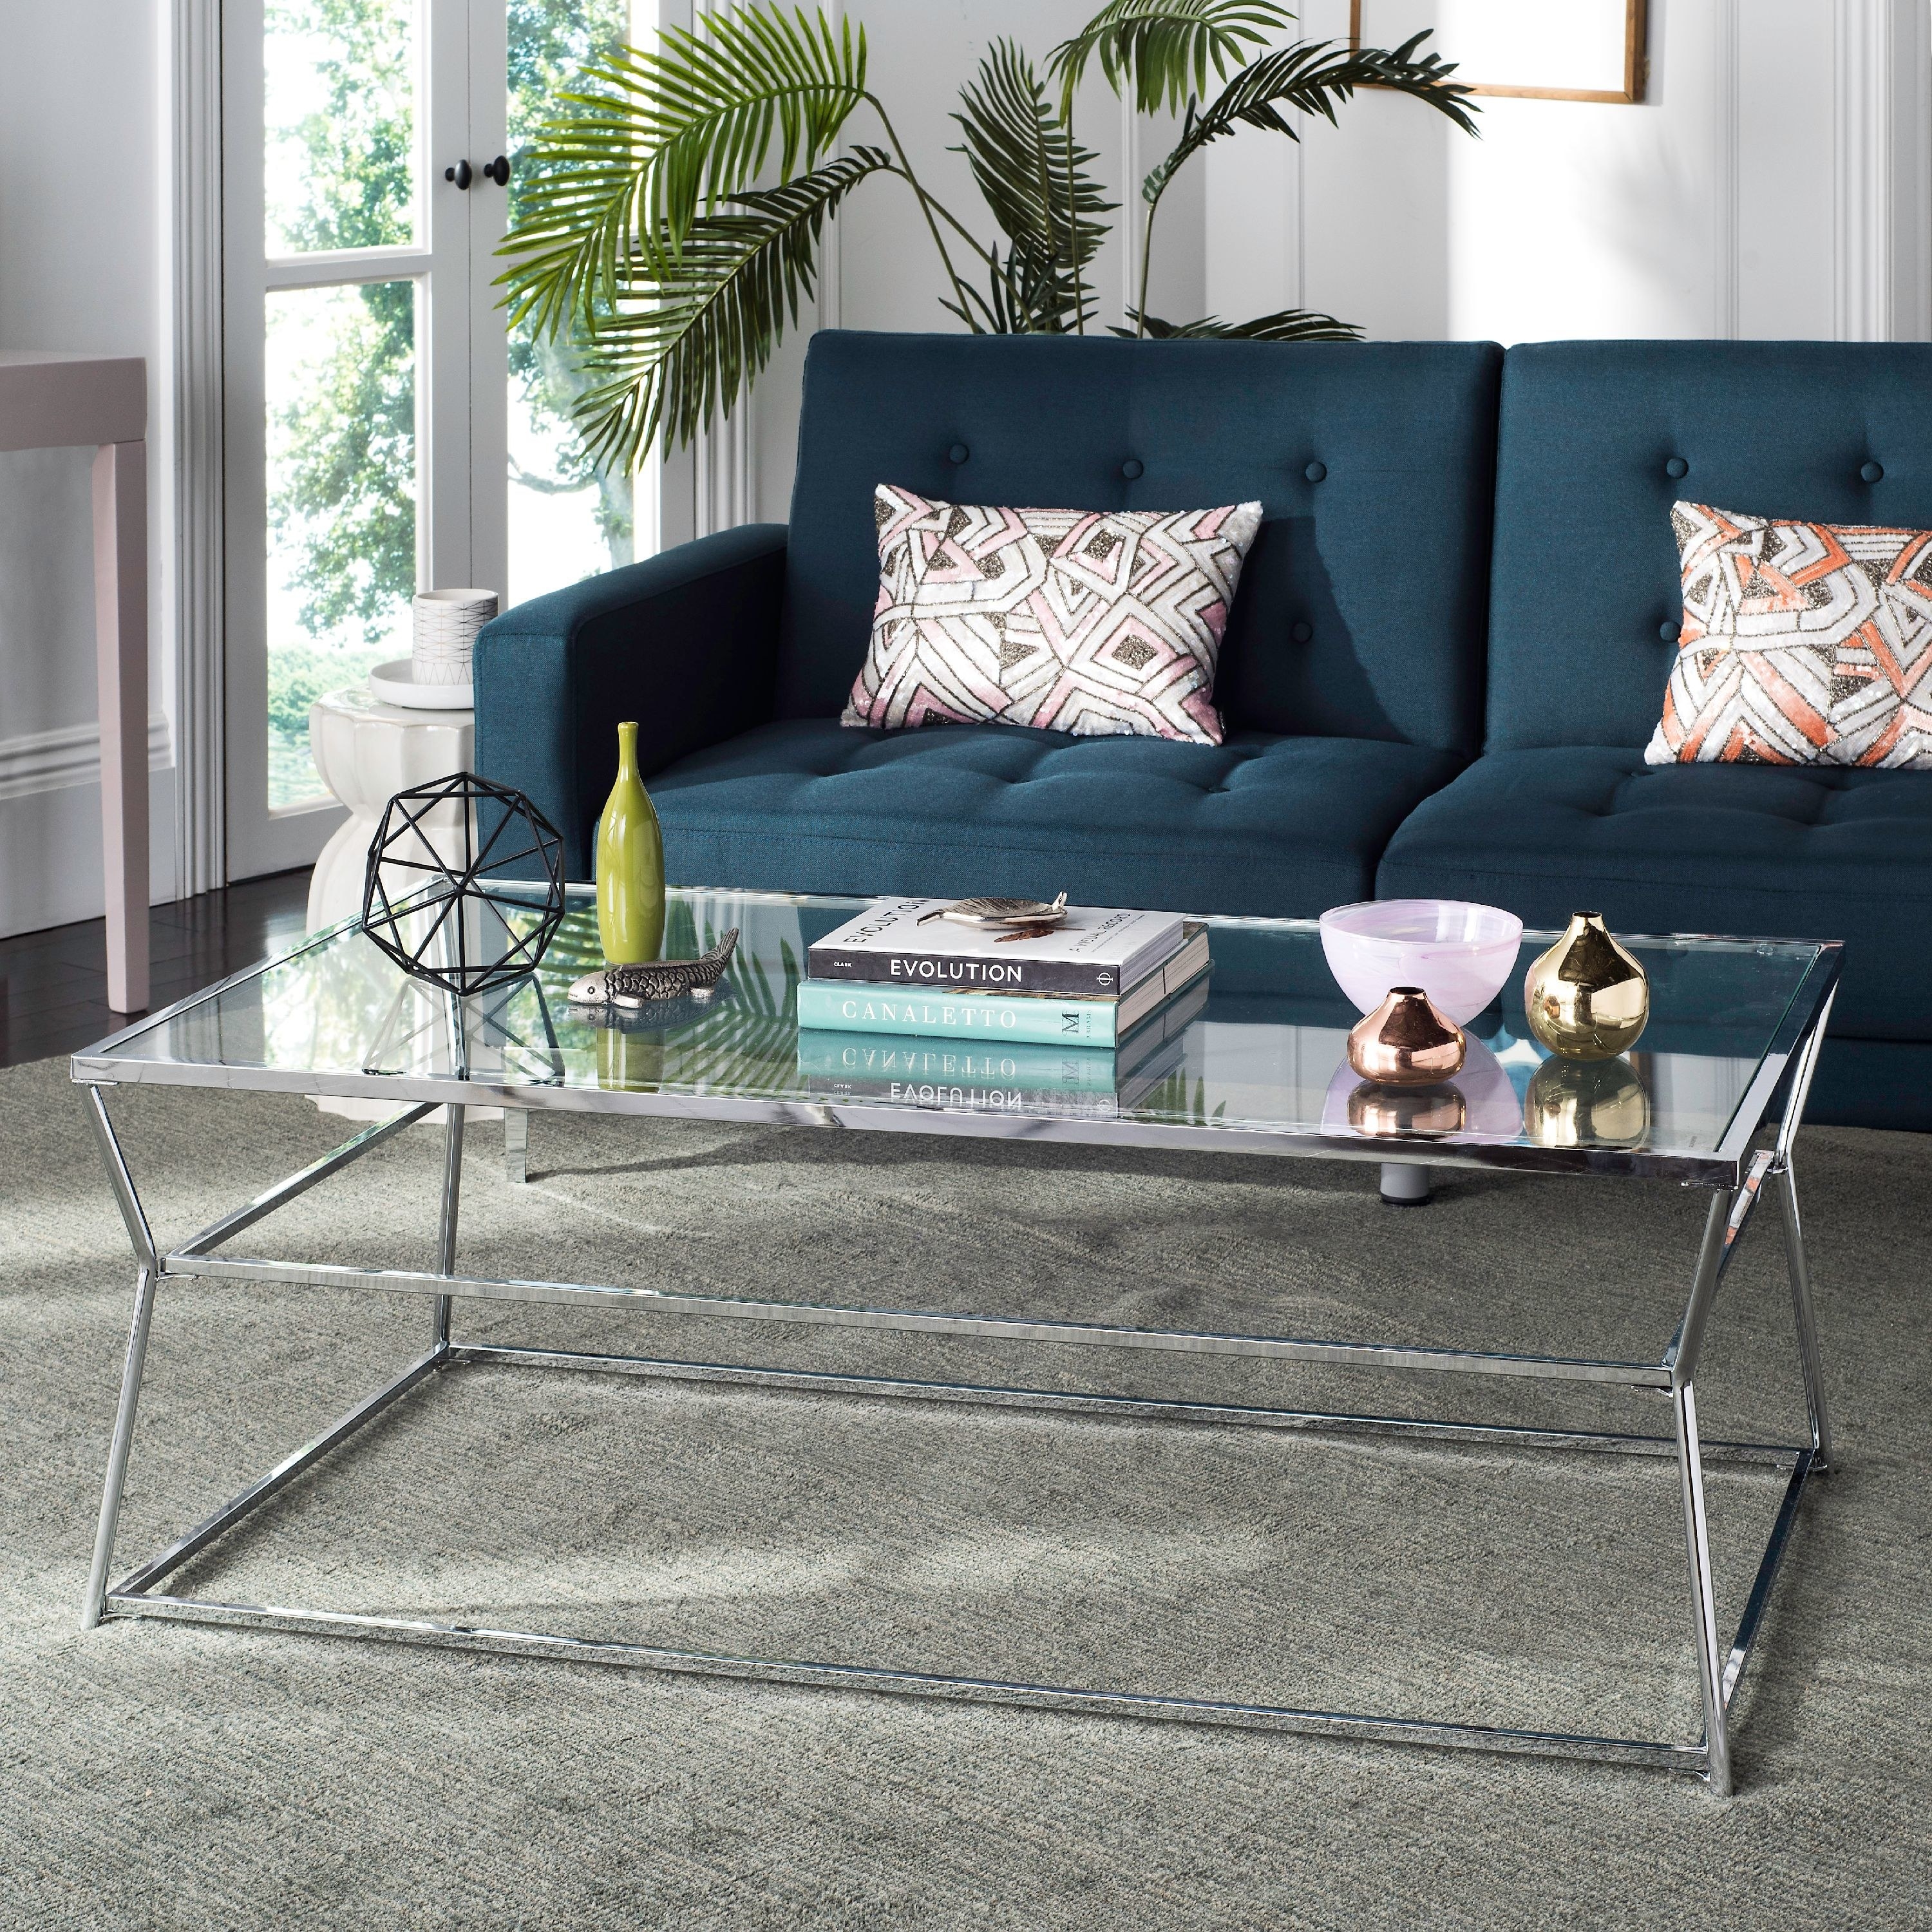 a glass coffee table on a grey rug next to a teal couch 